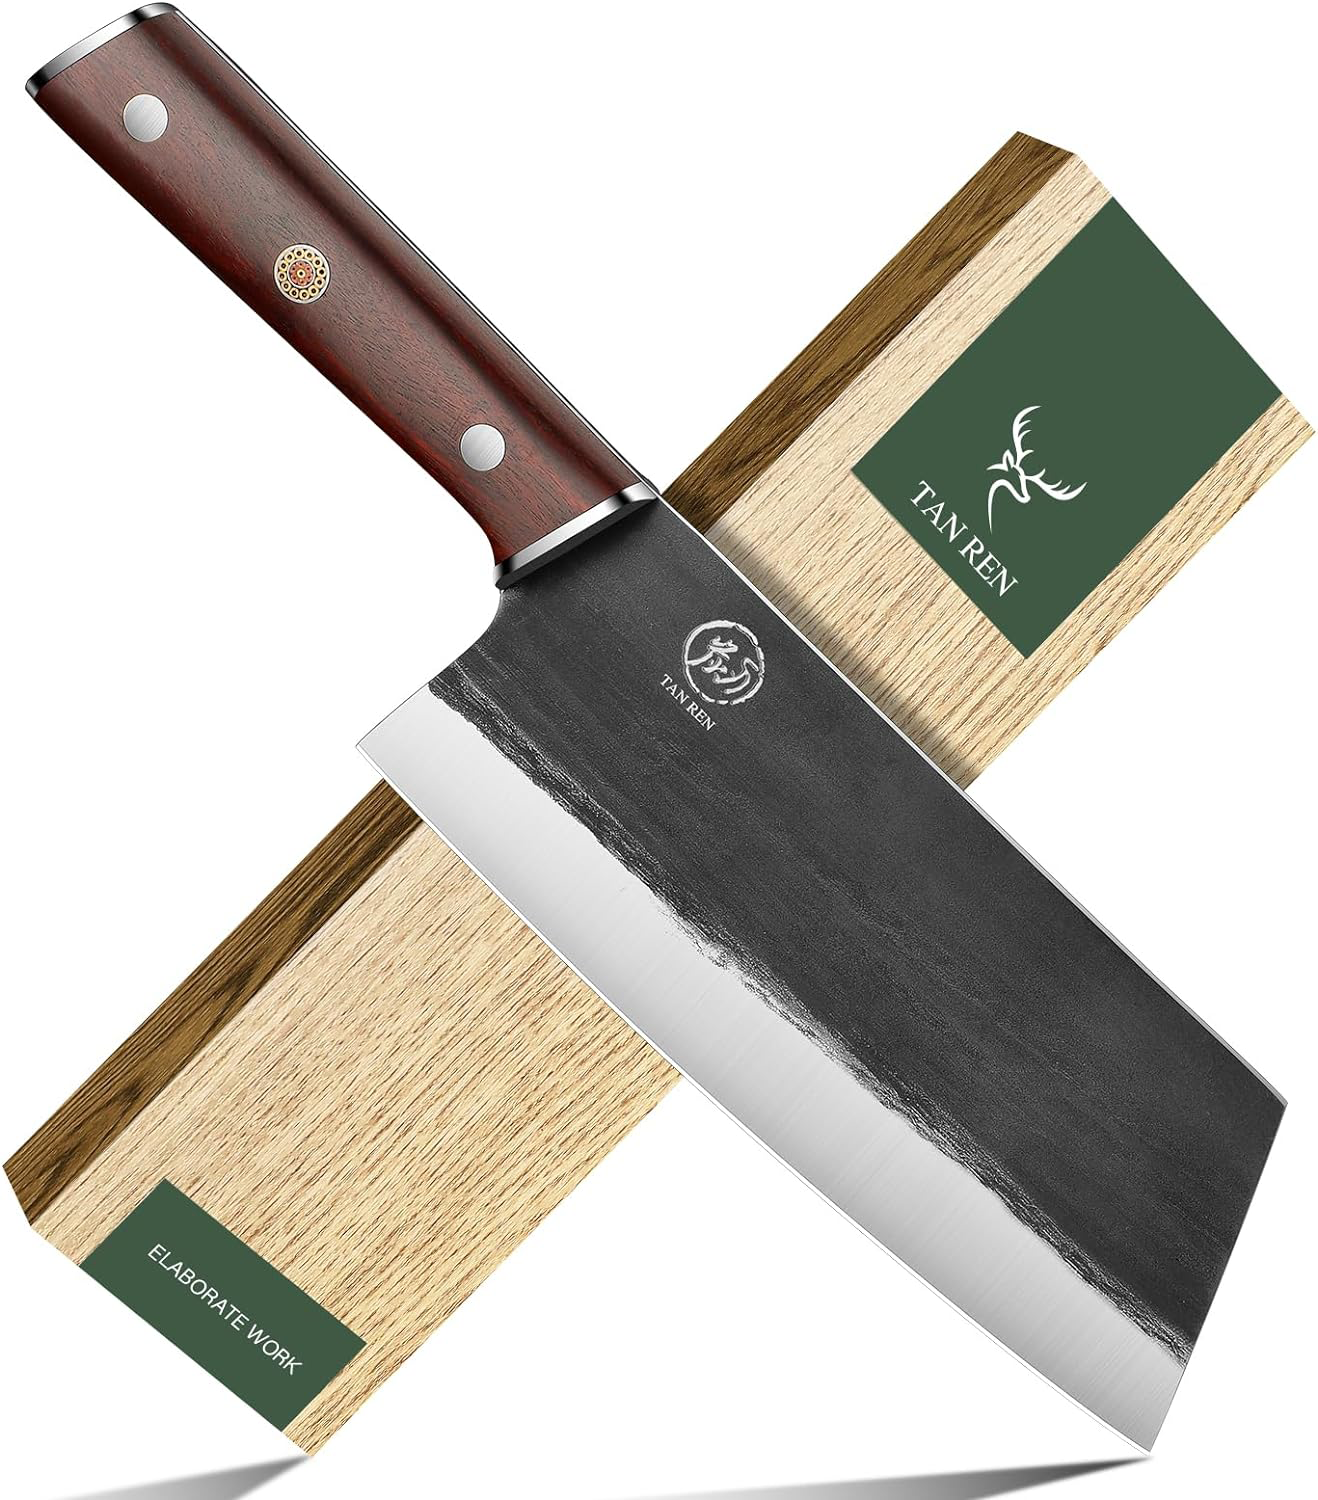 KD Premium 7.5 Inch Meat Cleaver: Hand-Forged Chinese Butcher Knife, High Carbon Steel, Ideal Gift for Him